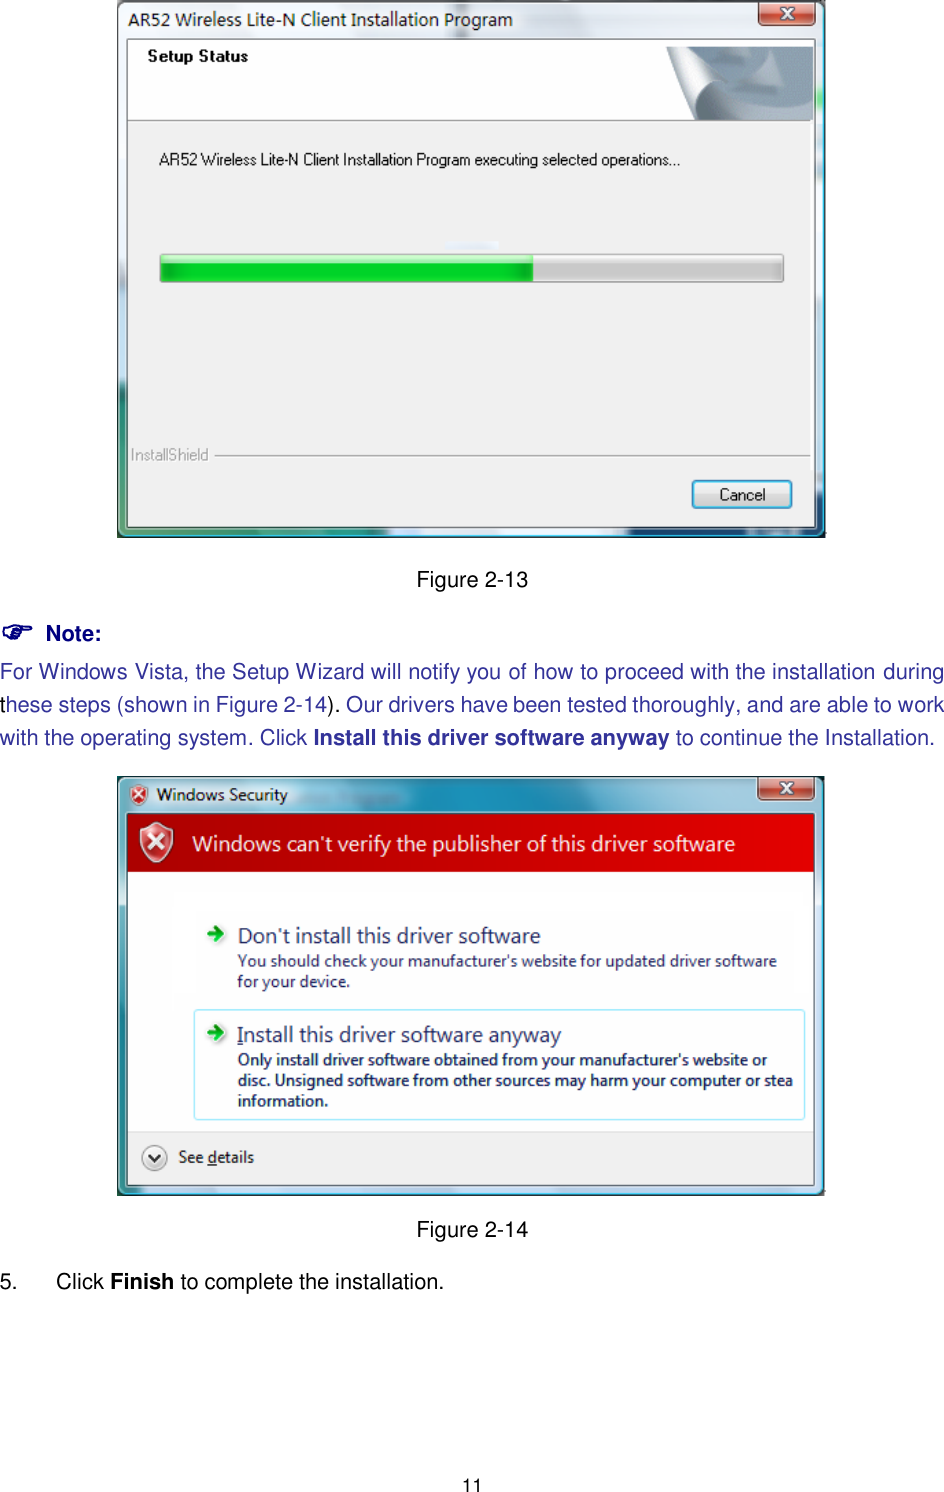  11  Figure 2-13  Note: For Windows Vista, the Setup Wizard will notify you of how to proceed with the installation during these steps (shown in Figure 2-14). Our drivers have been tested thoroughly, and are able to work with the operating system. Click Install this driver software anyway to continue the Installation.  Figure 2-14 5.  Click Finish to complete the installation. 